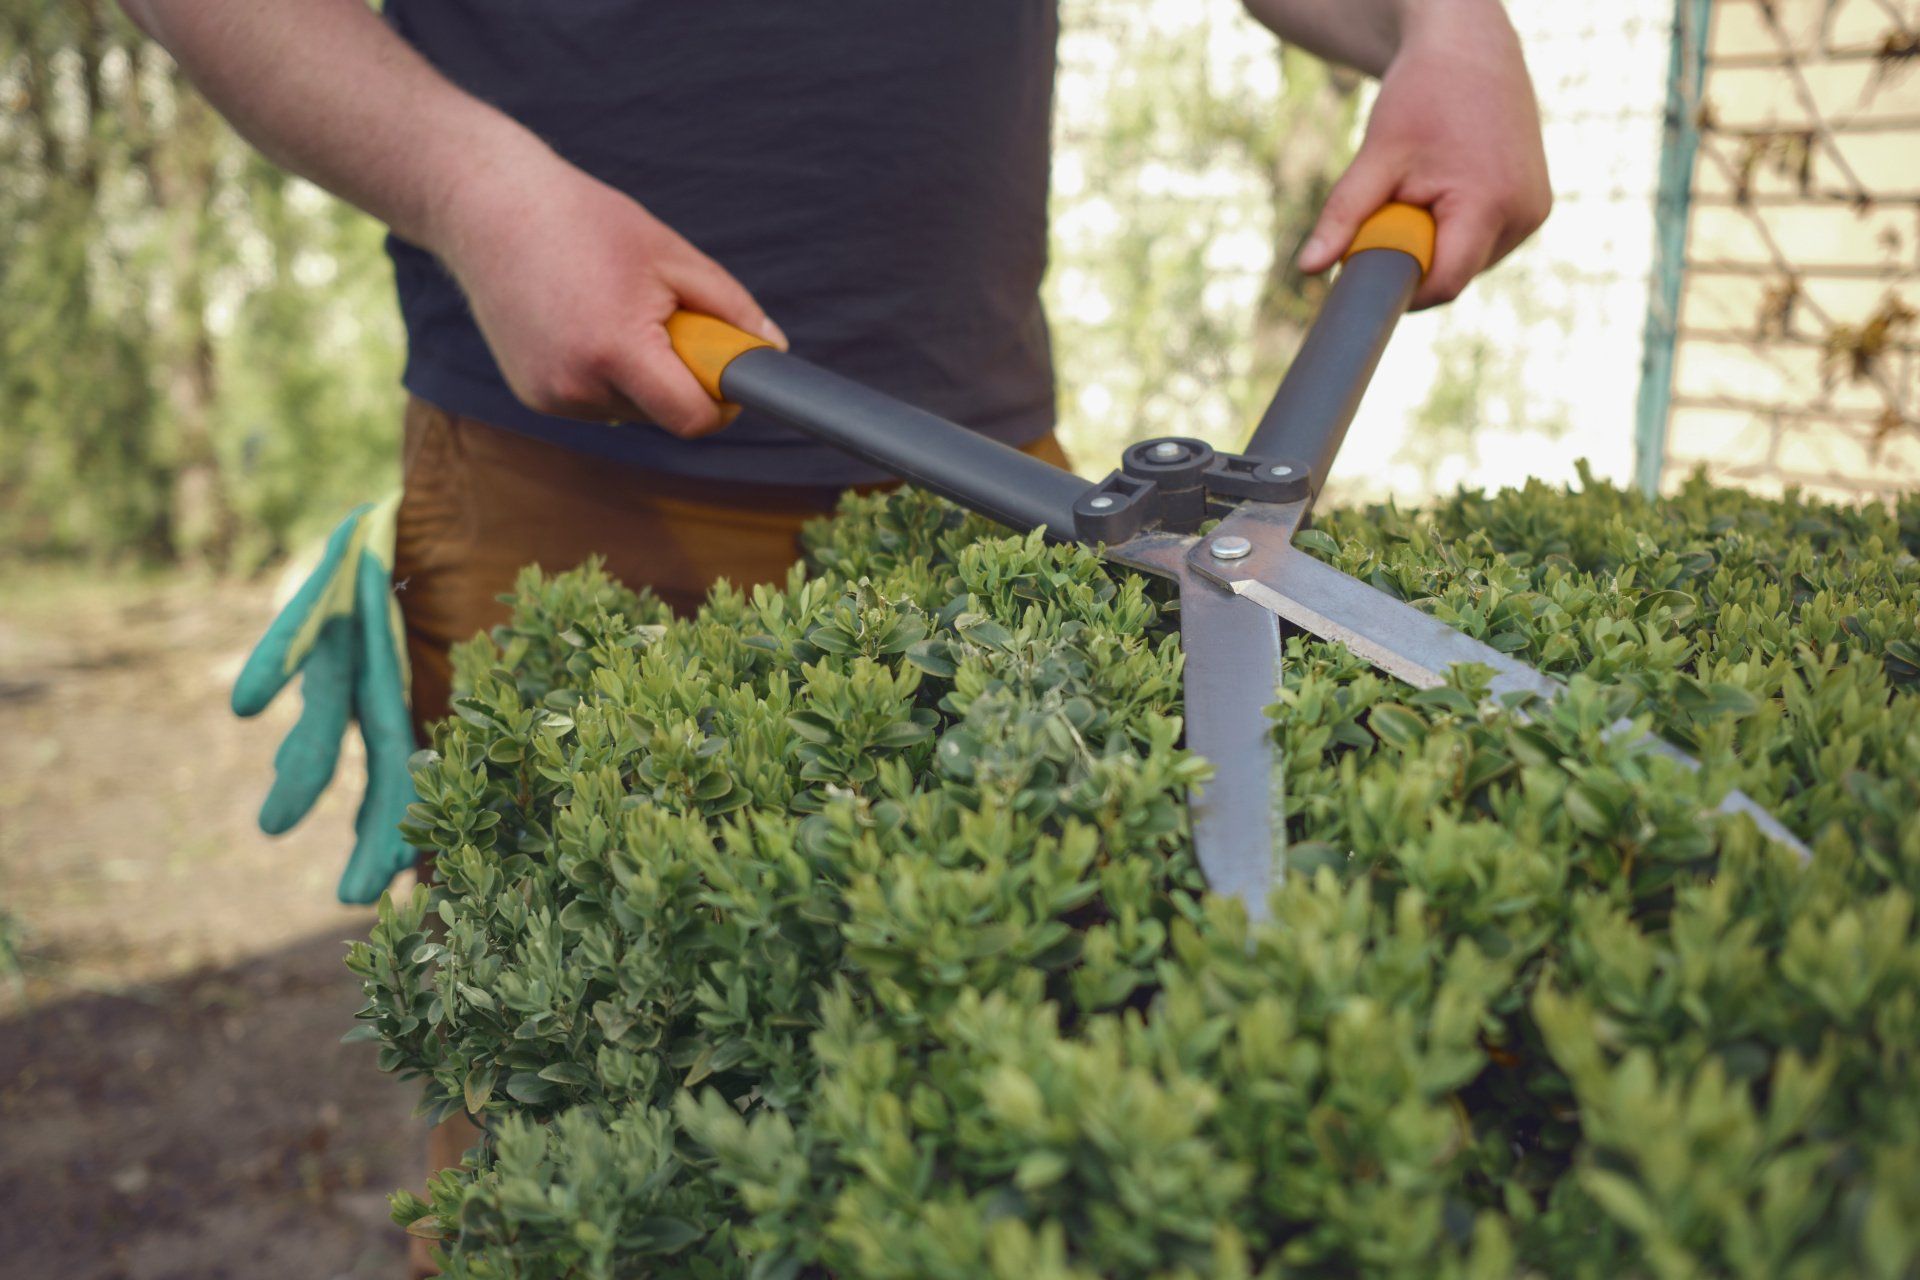 A man in his backyard, using hedge shears to trim a lush green shrub with his bare hands.